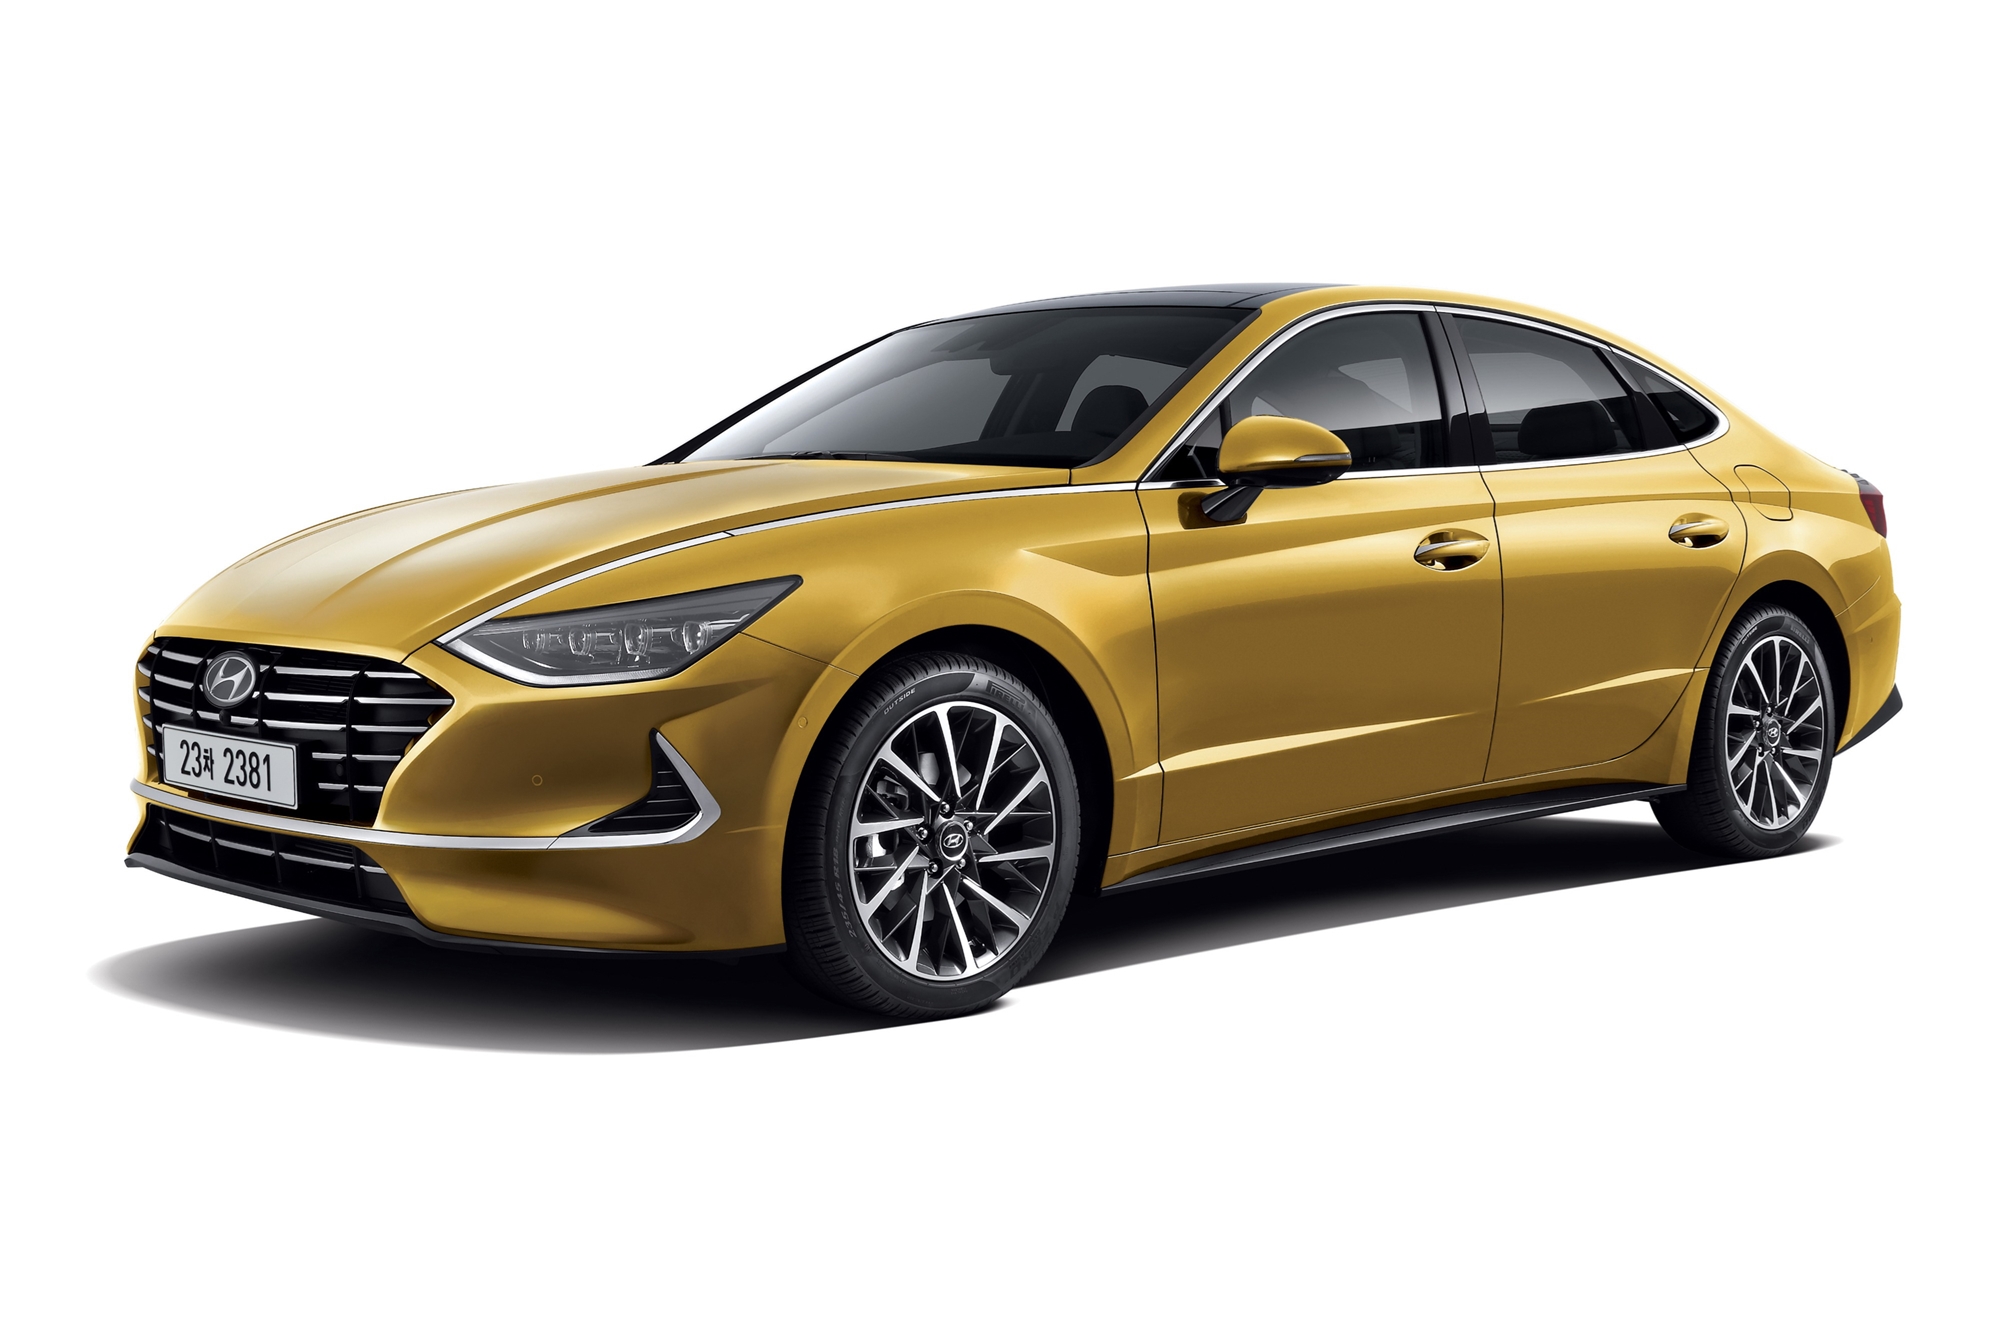 2022 Hyundai Sonata N Line Full Specs, Features and Price CarBuzz